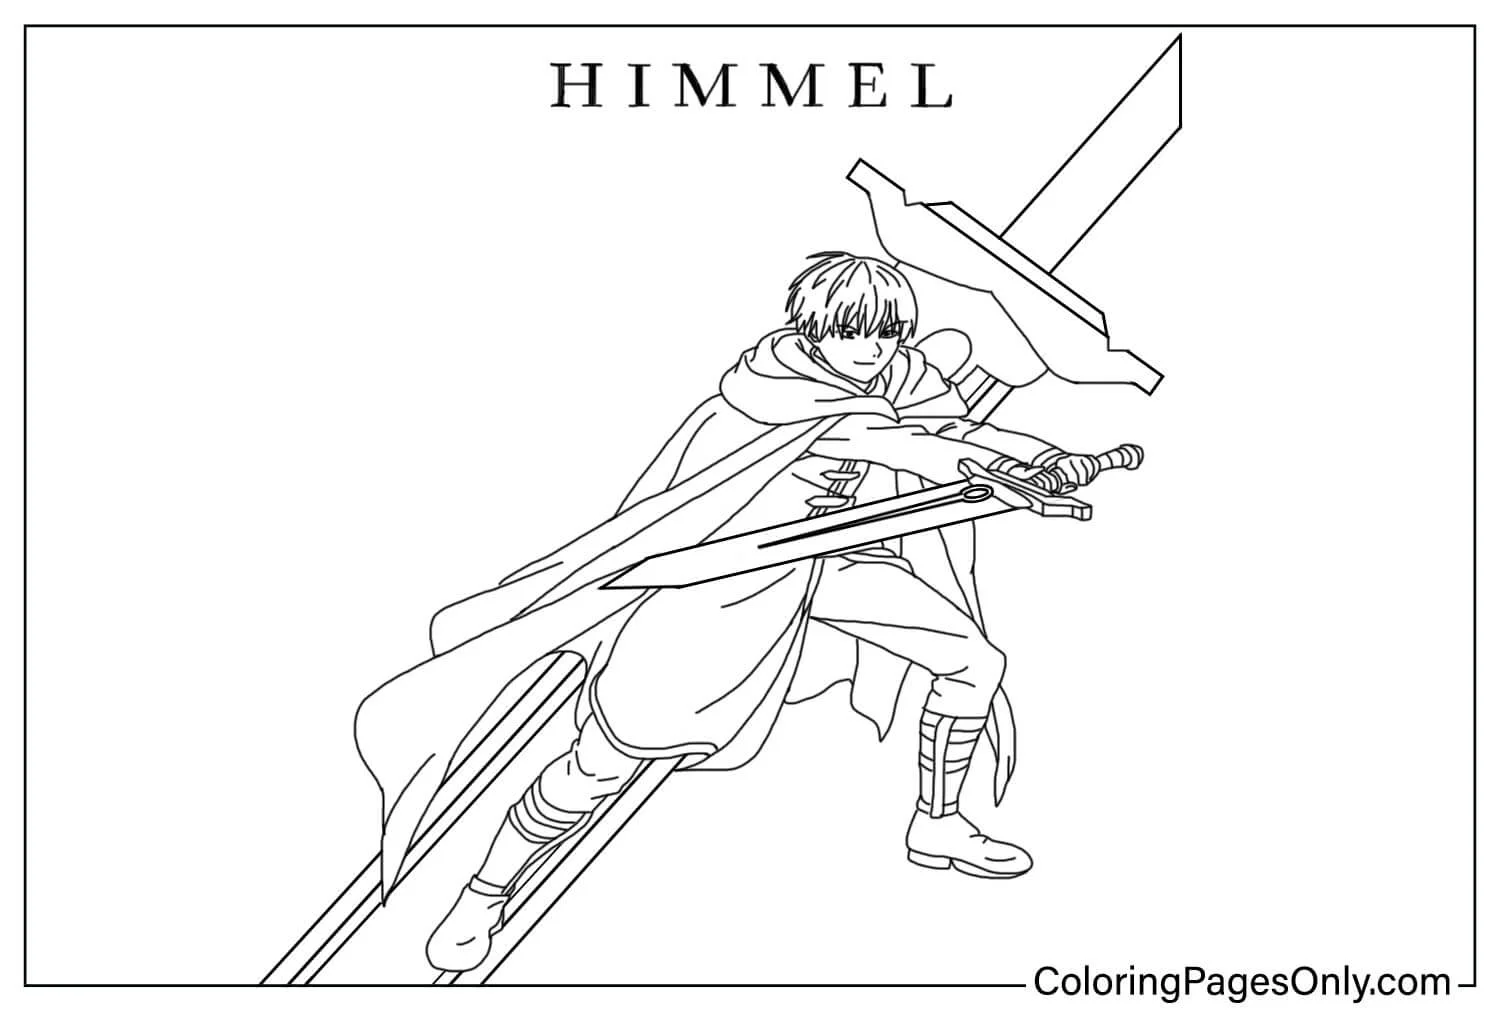 Himmel Coloring Page from Frieren: Beyond Journey’s End